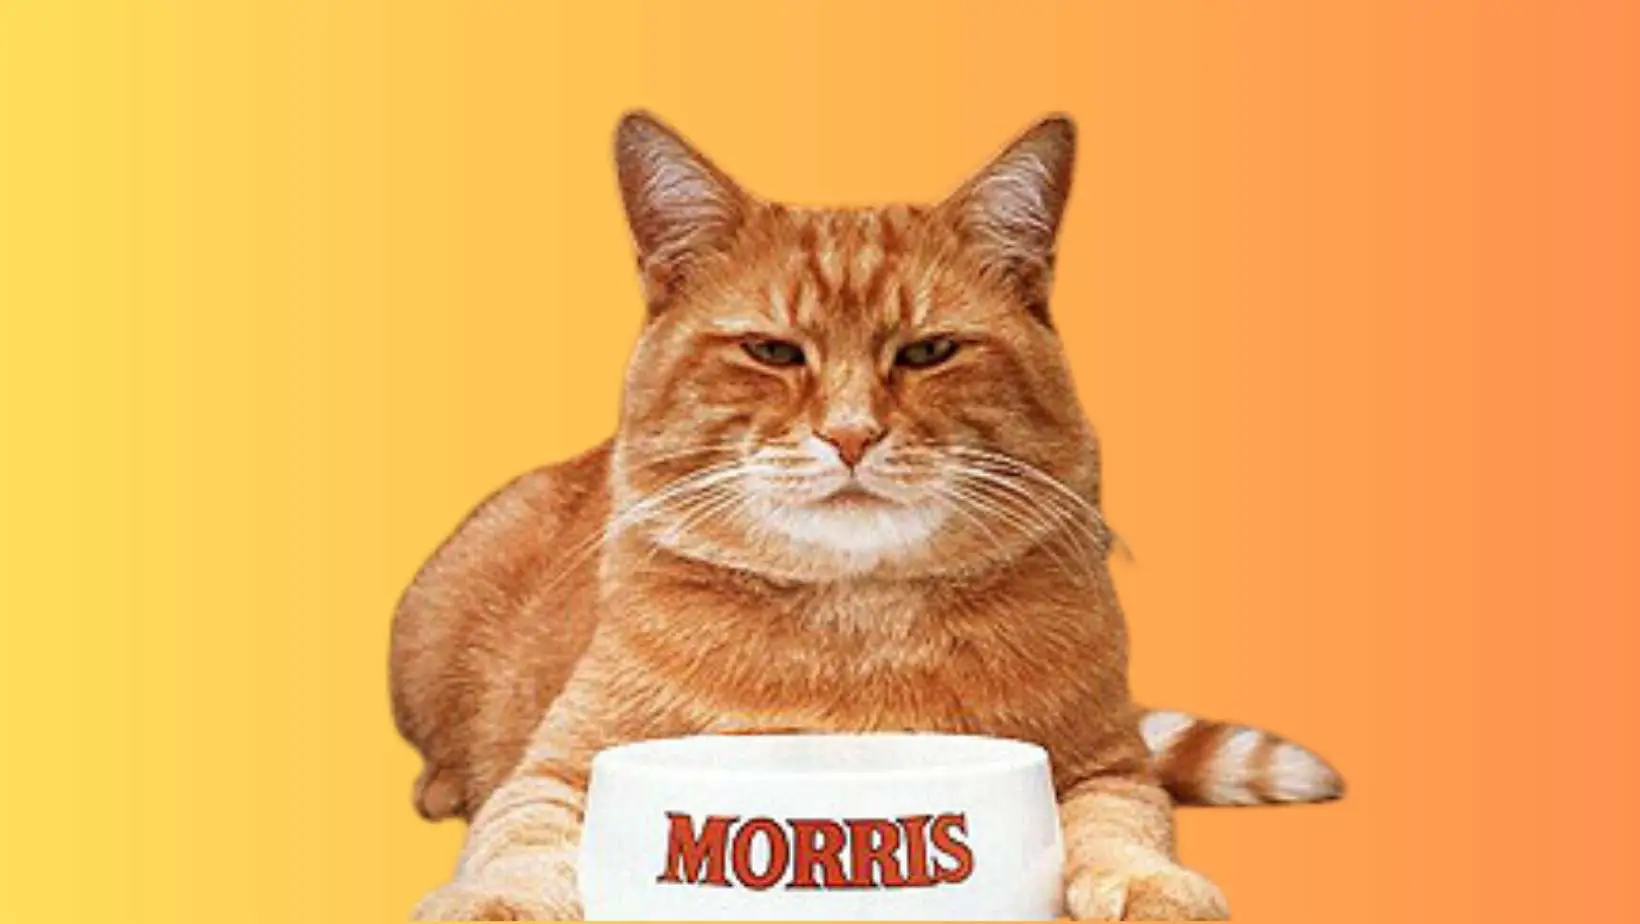 Morris the cat was made famous by what brand of cat food?